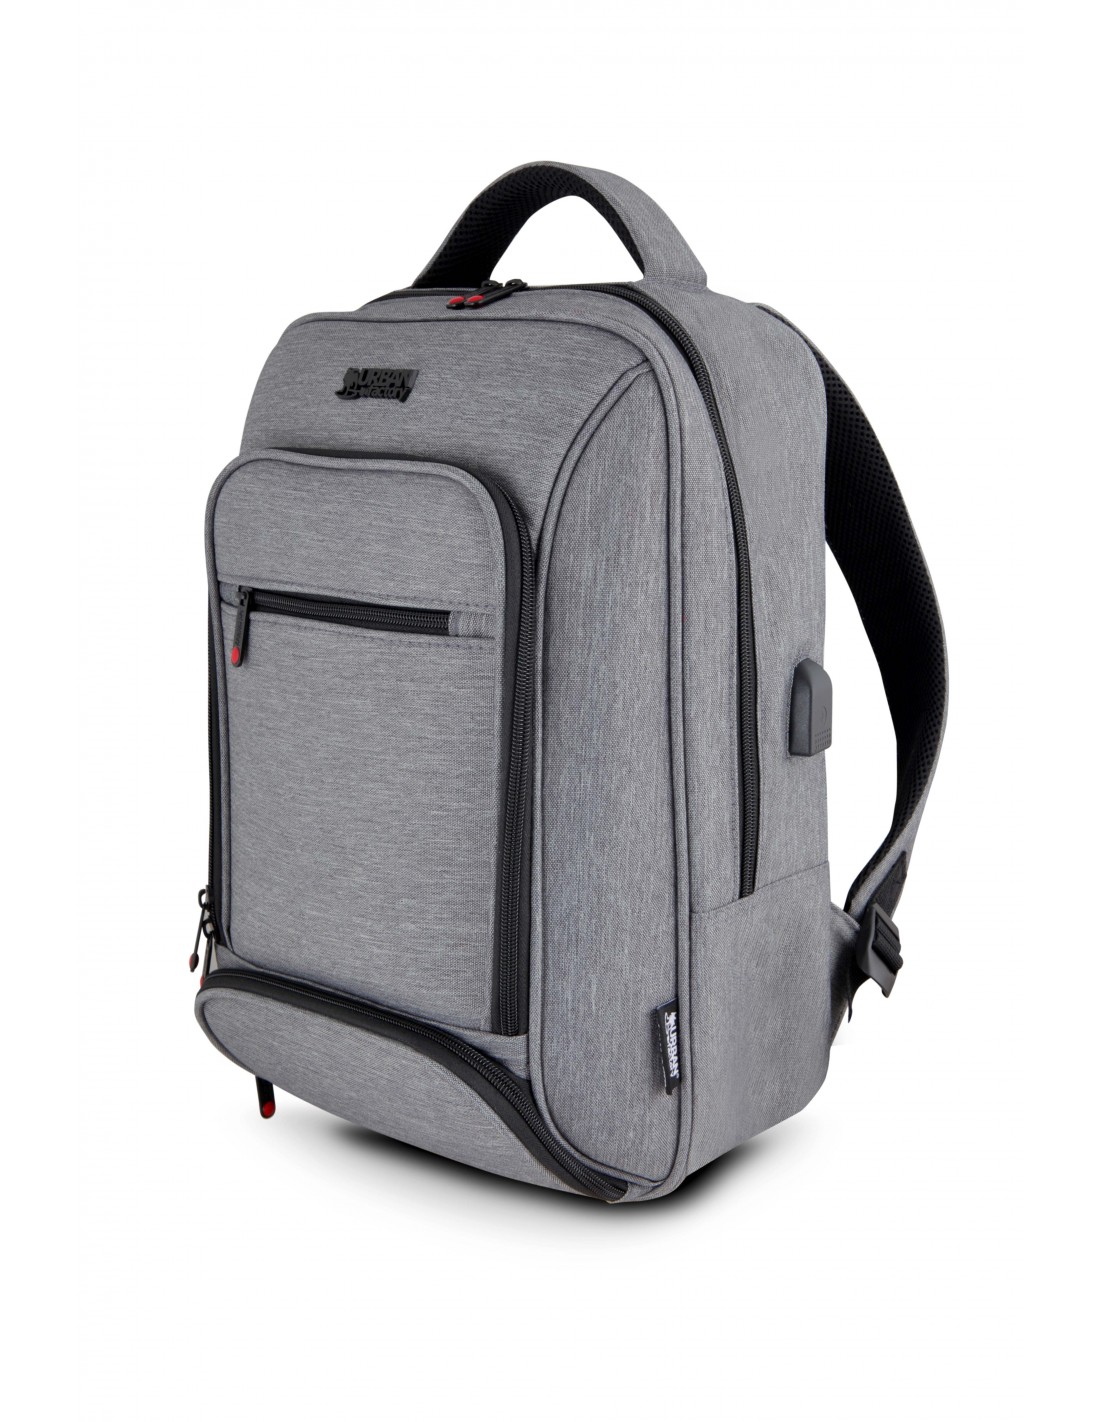 Compact backpack with external USB plug